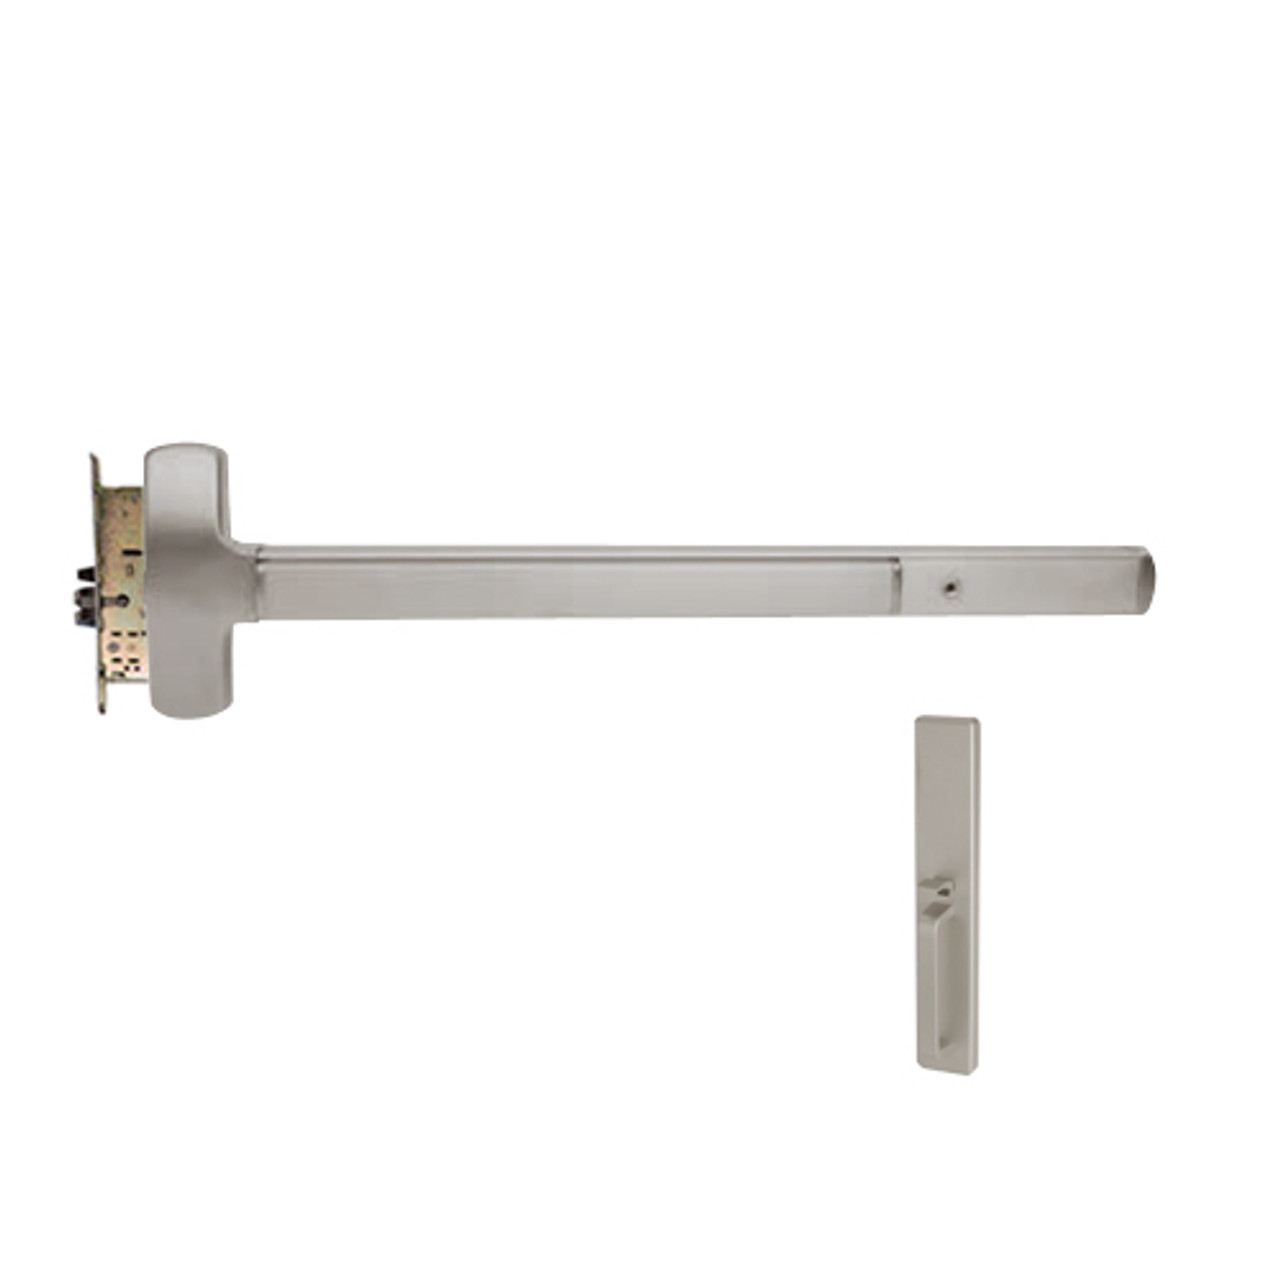 25-M-TP-BE-US32D-4-RHR Falcon Exit Device in Satin Stainless Steel